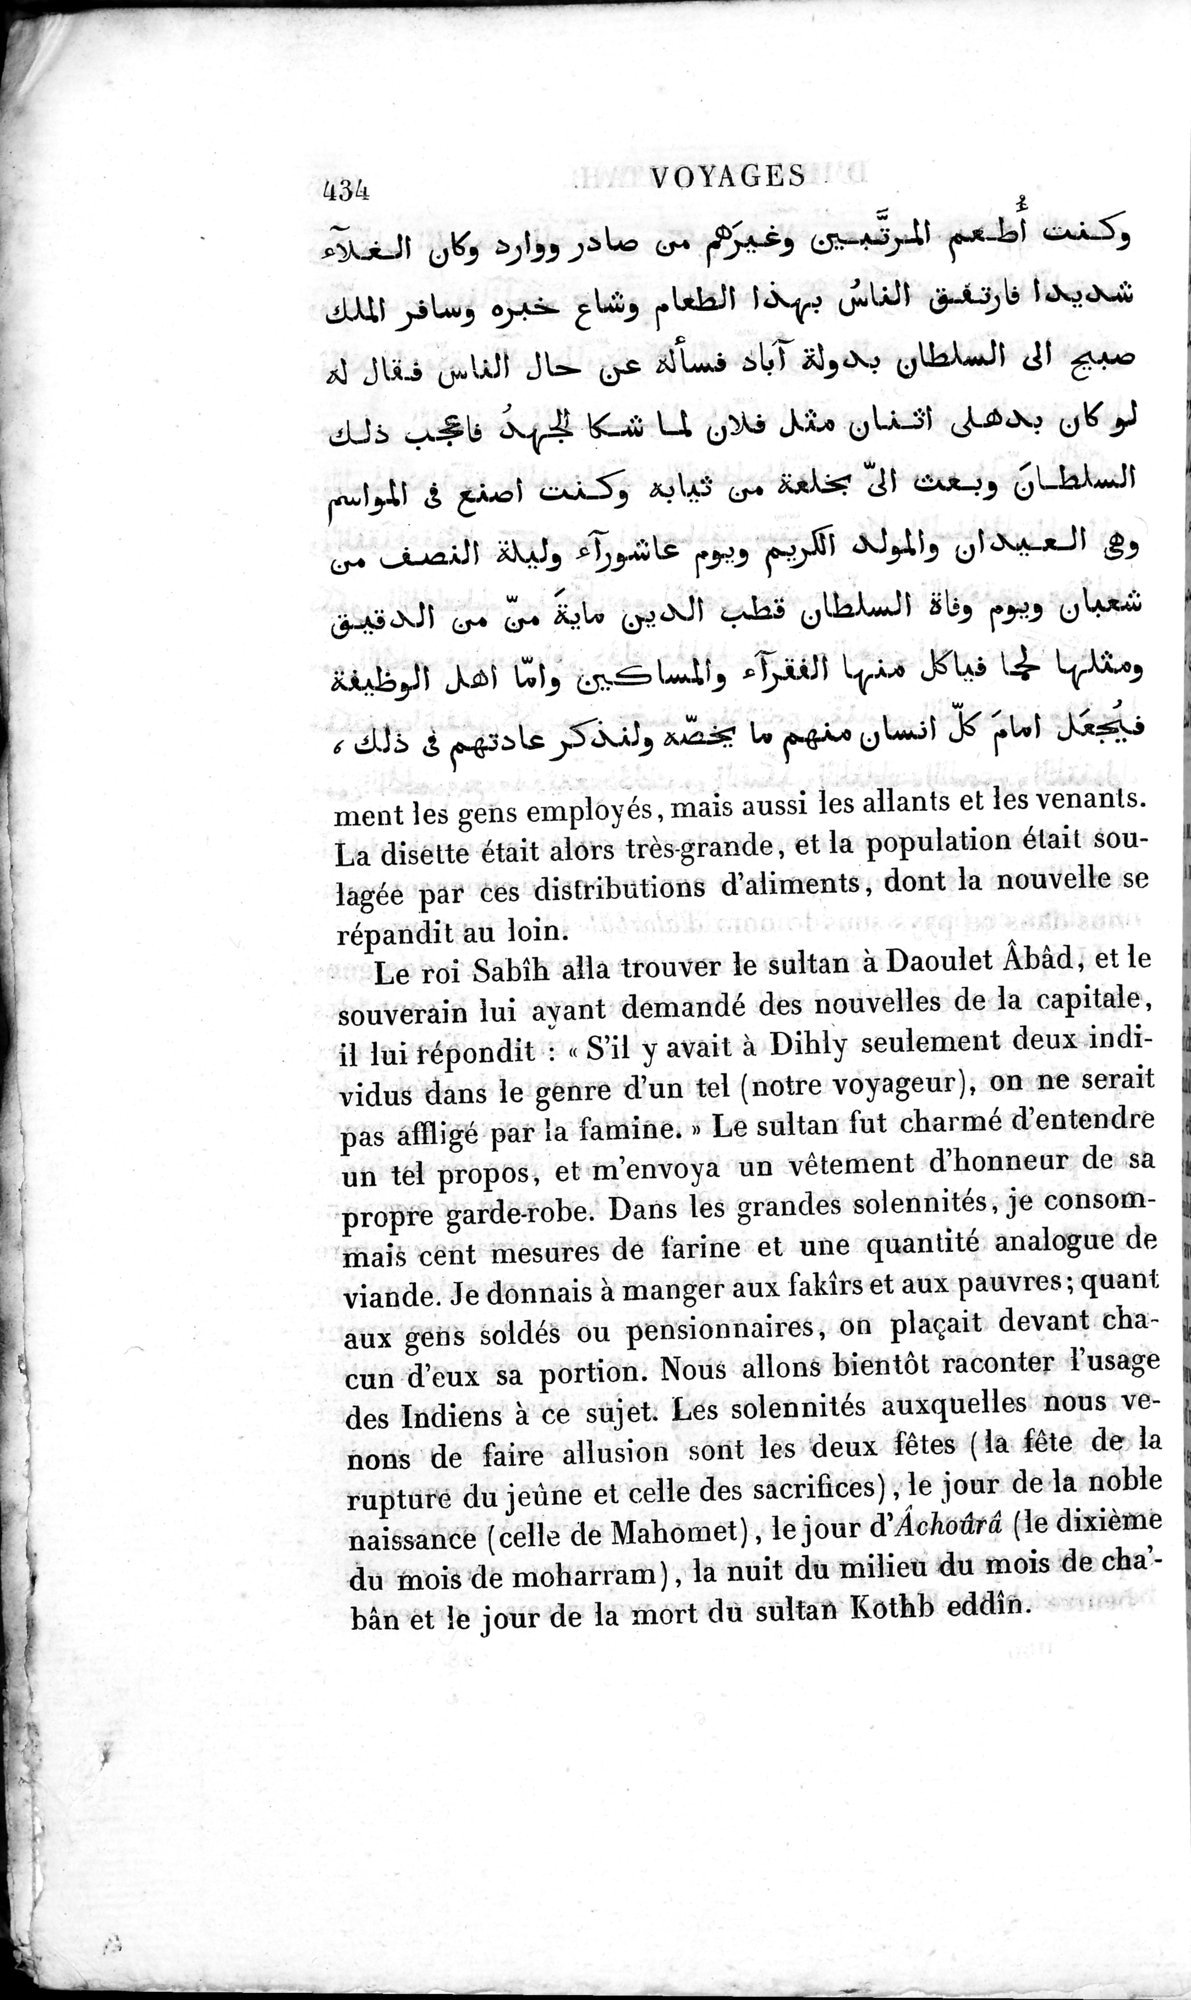 Voyages d'Ibn Batoutah : vol.3 / Page 474 (Grayscale High Resolution Image)